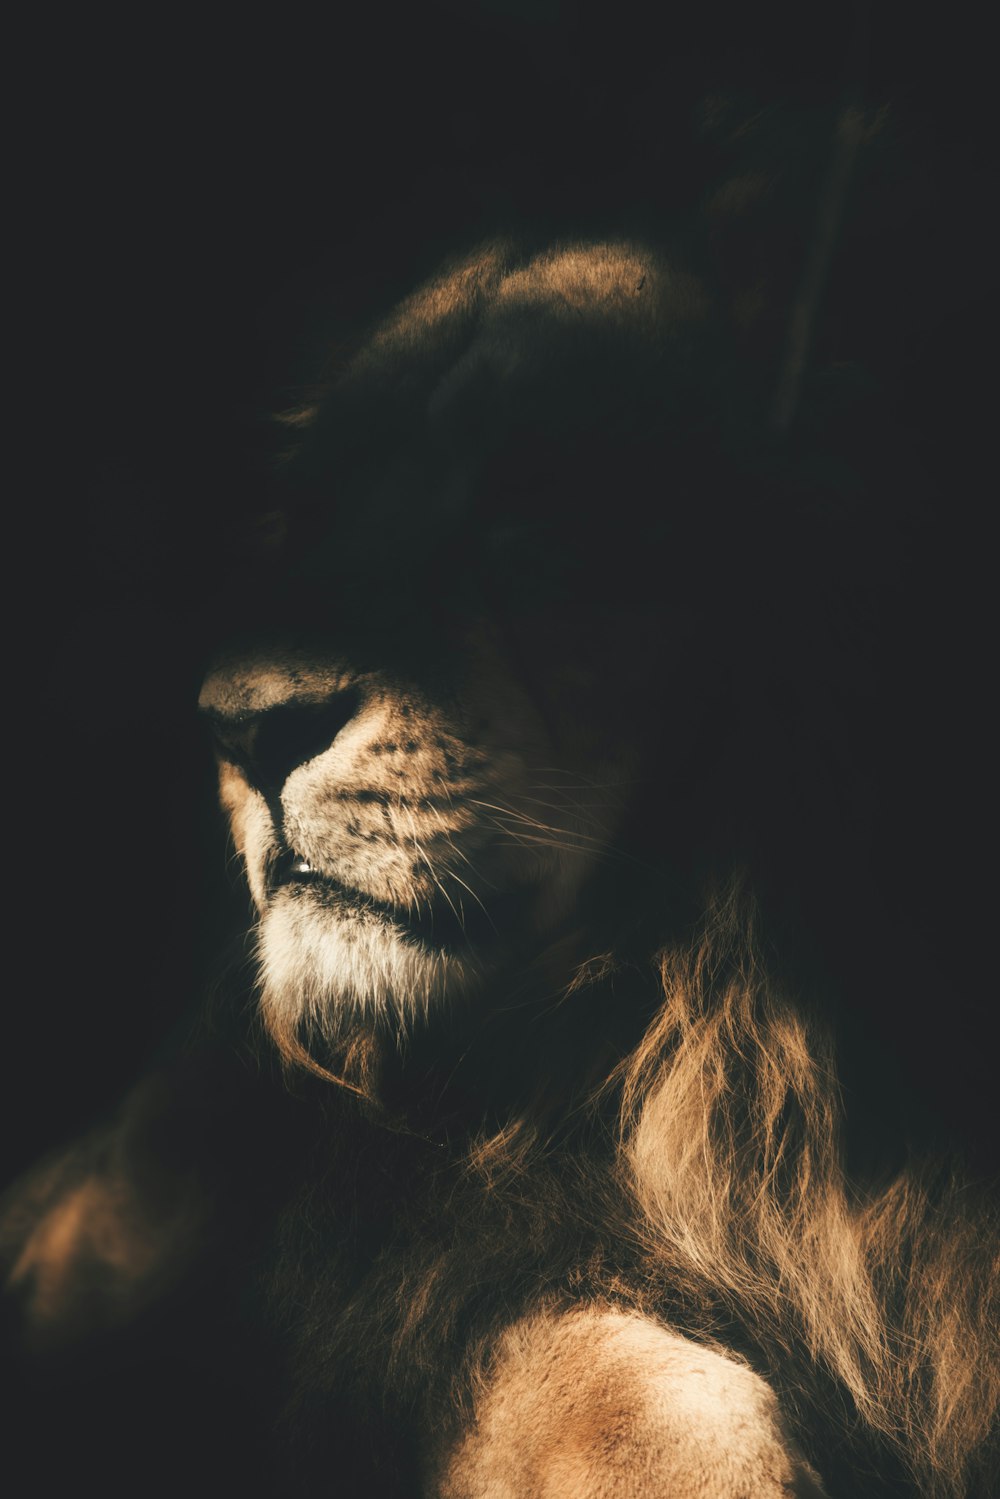 a close up of a lion's face in the dark